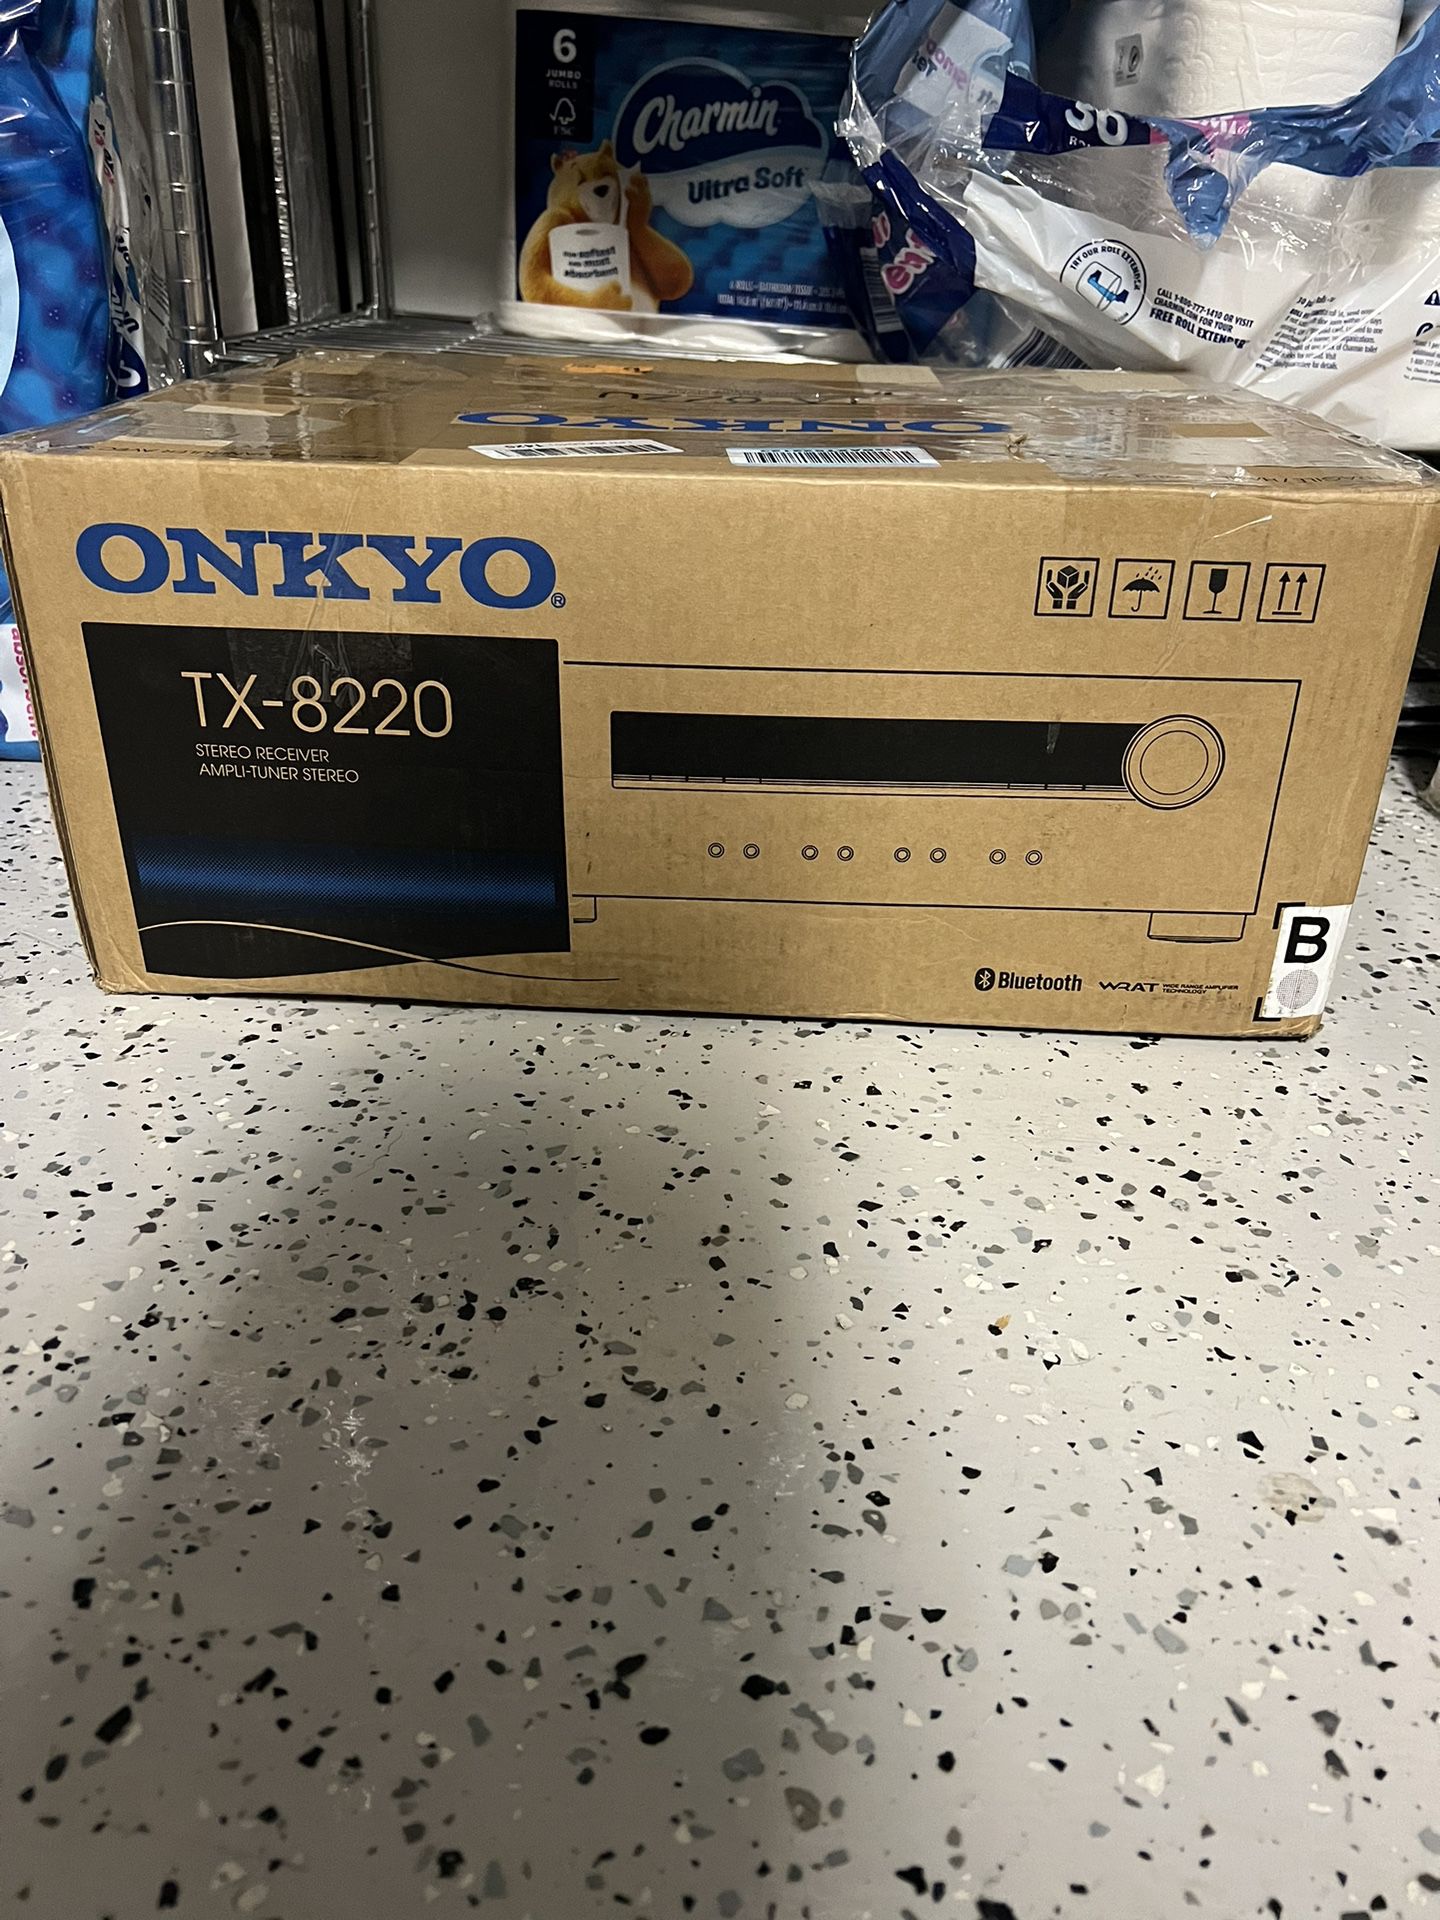 Onkyo TX-8220 2 Home Audio Channel Stereo Receiver with Bluetooth, Brand New